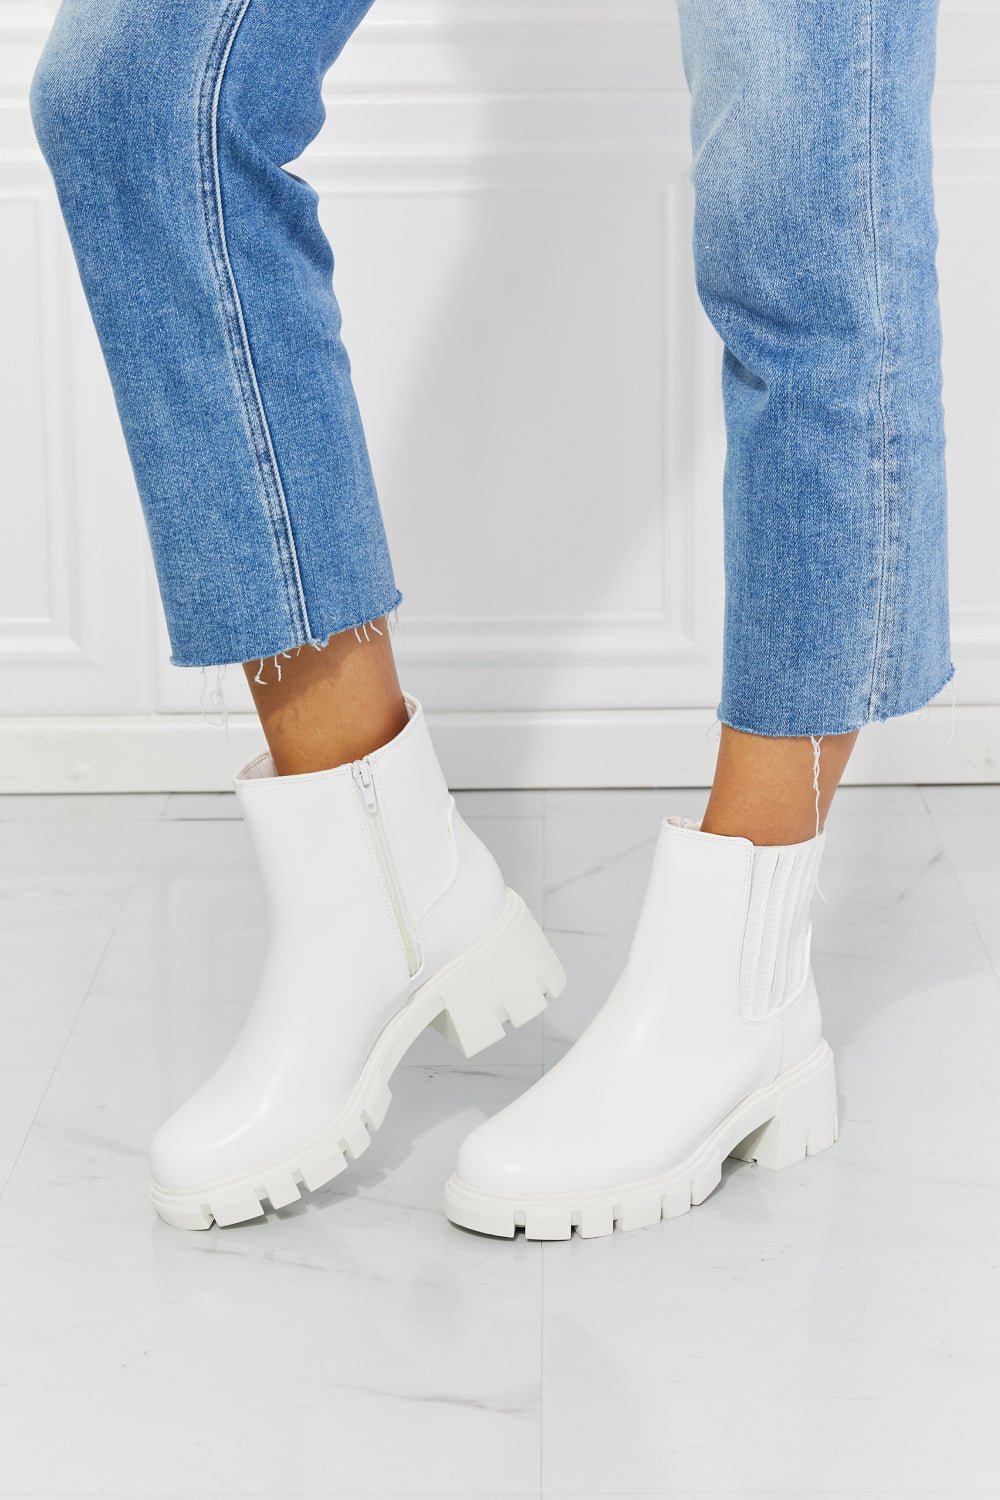 MMShoes What It Takes Lug Sole Chelsea Boots in White - GemThreads Boutique